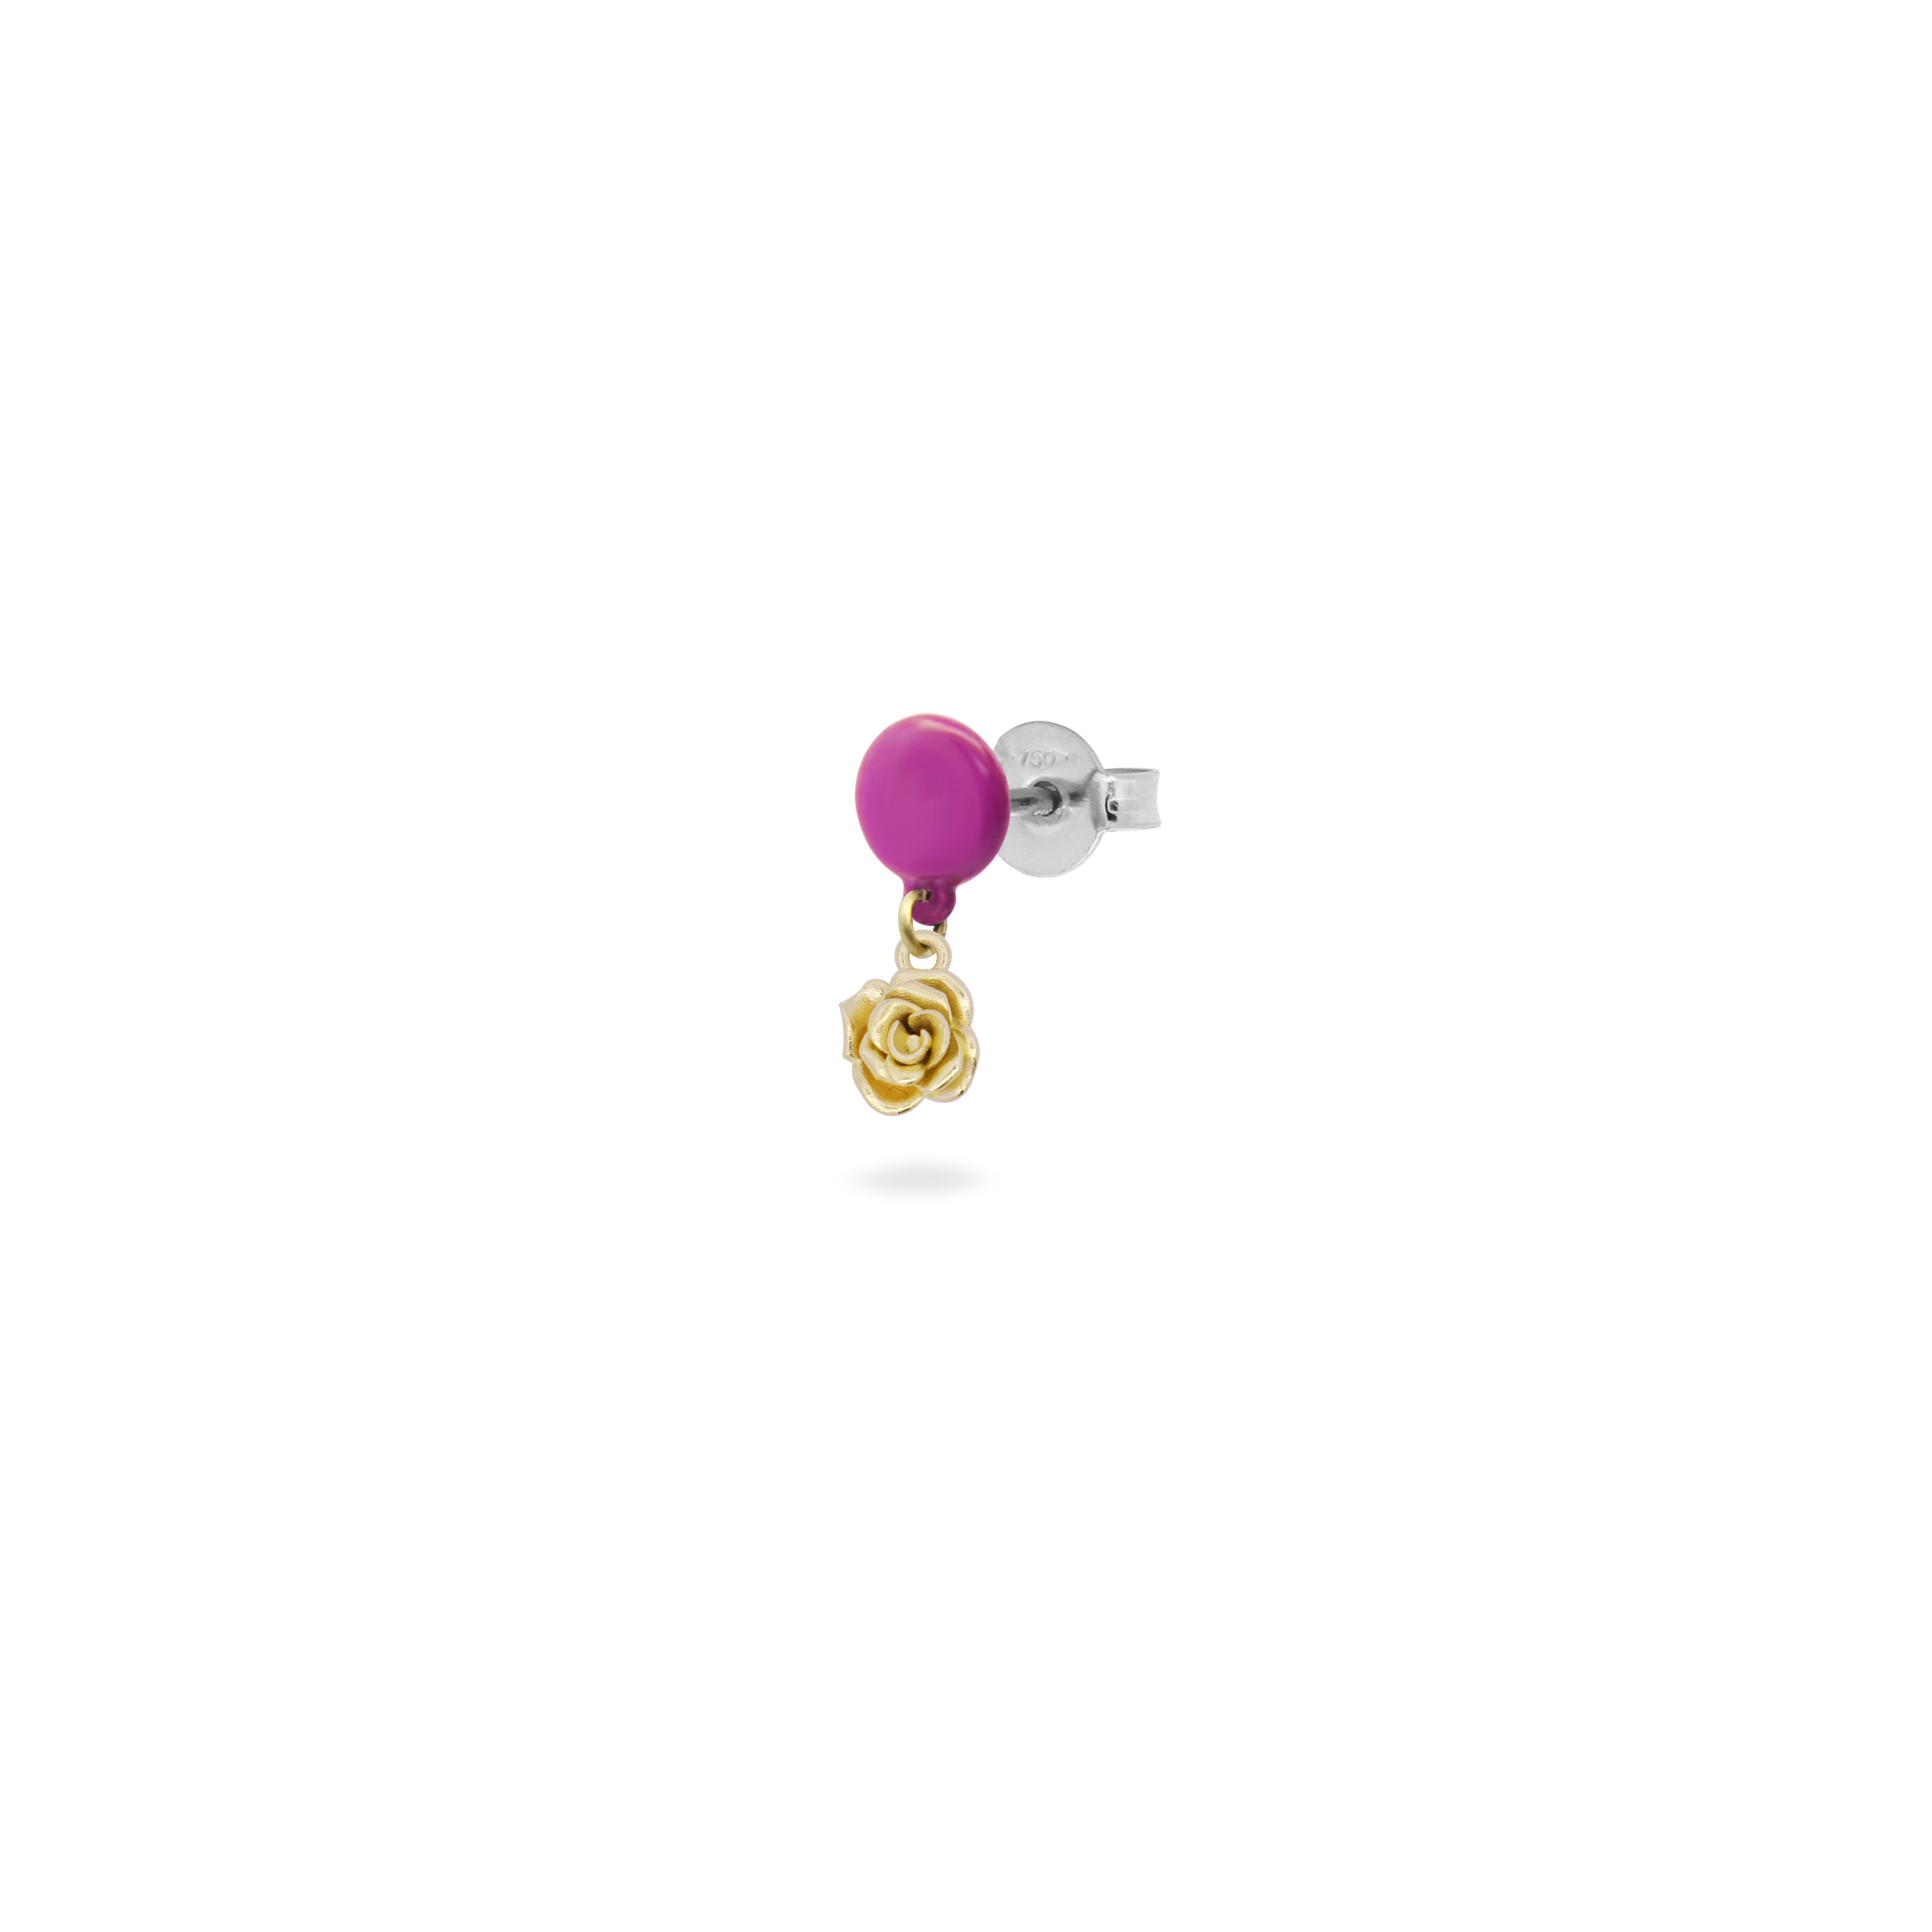 Earrings - Single earring with Rose and painted button - ORO18KT - 1 | Rue des Mille